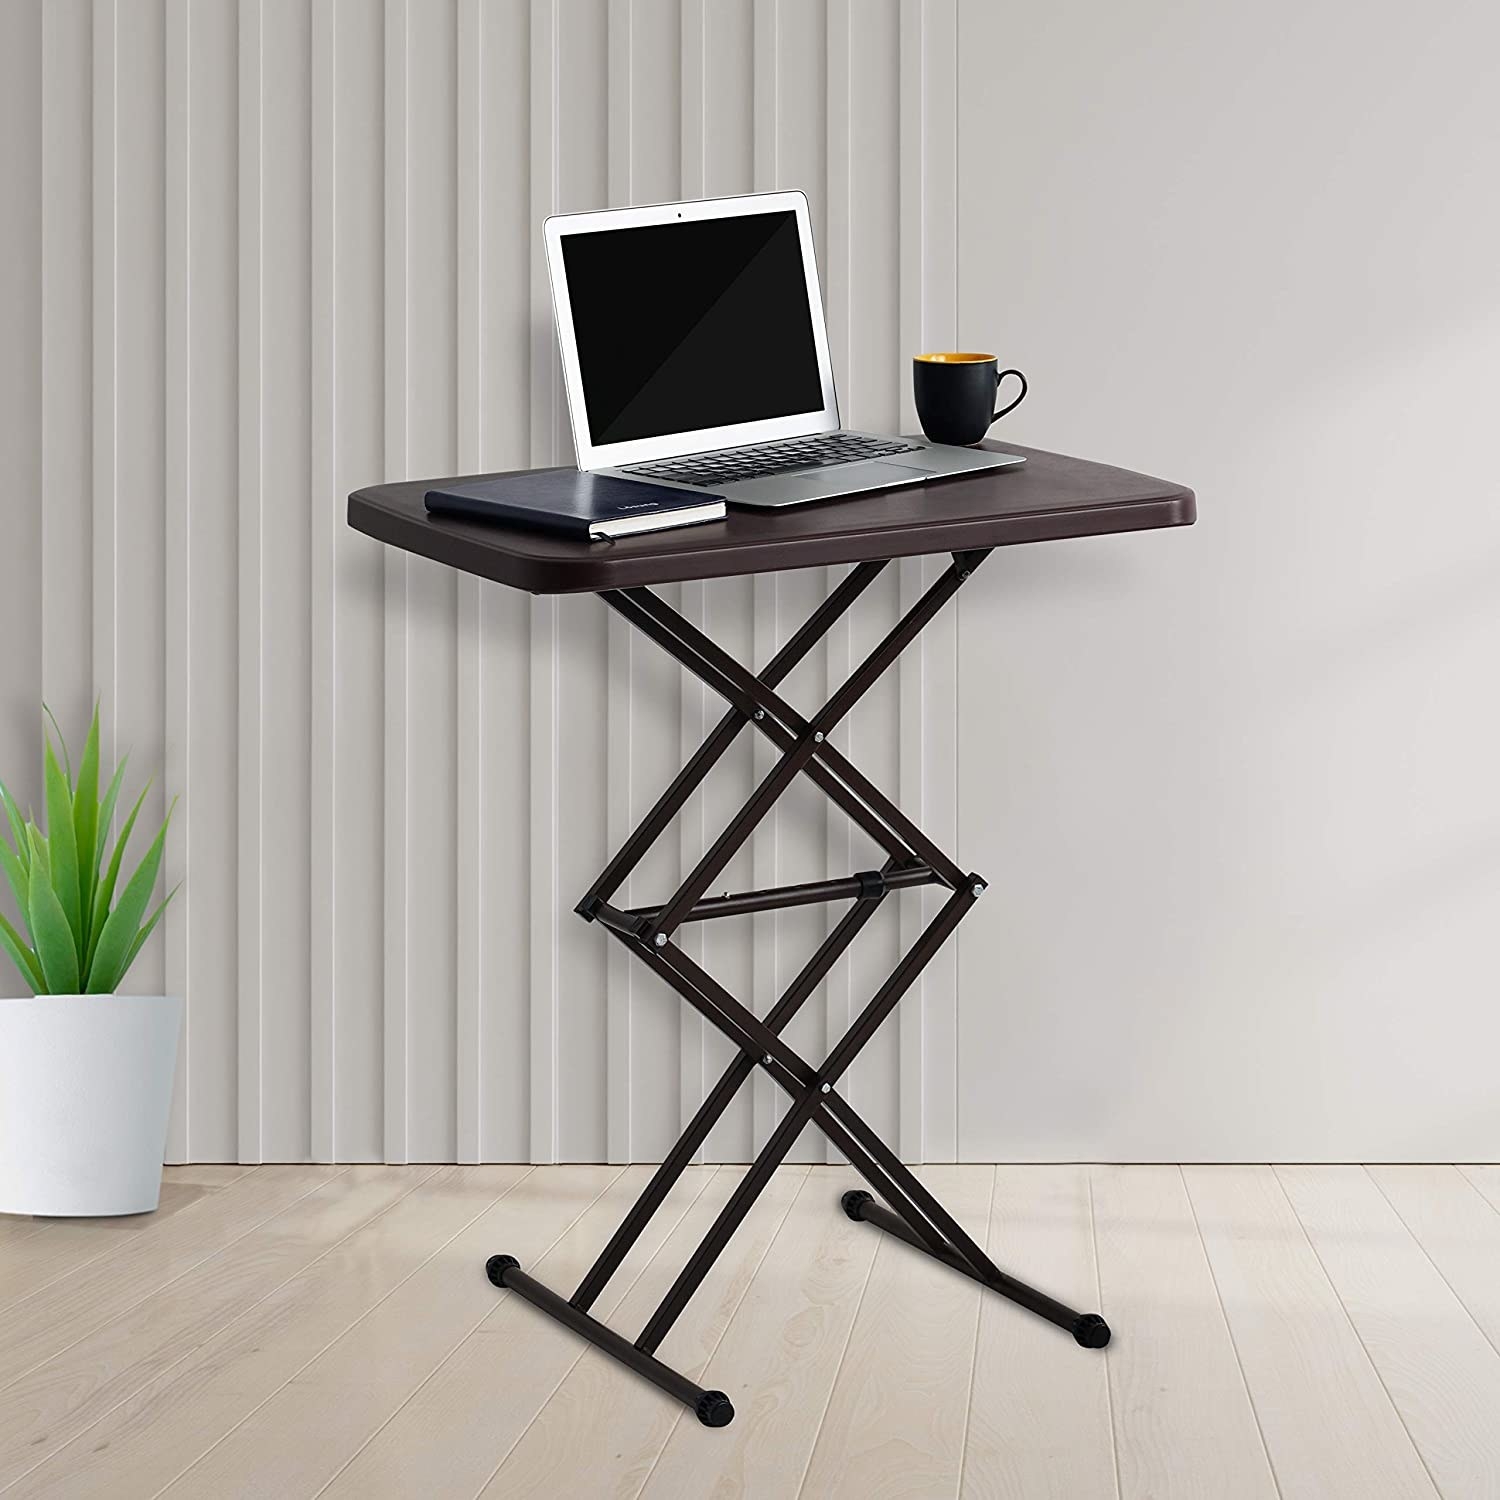 Foldable table